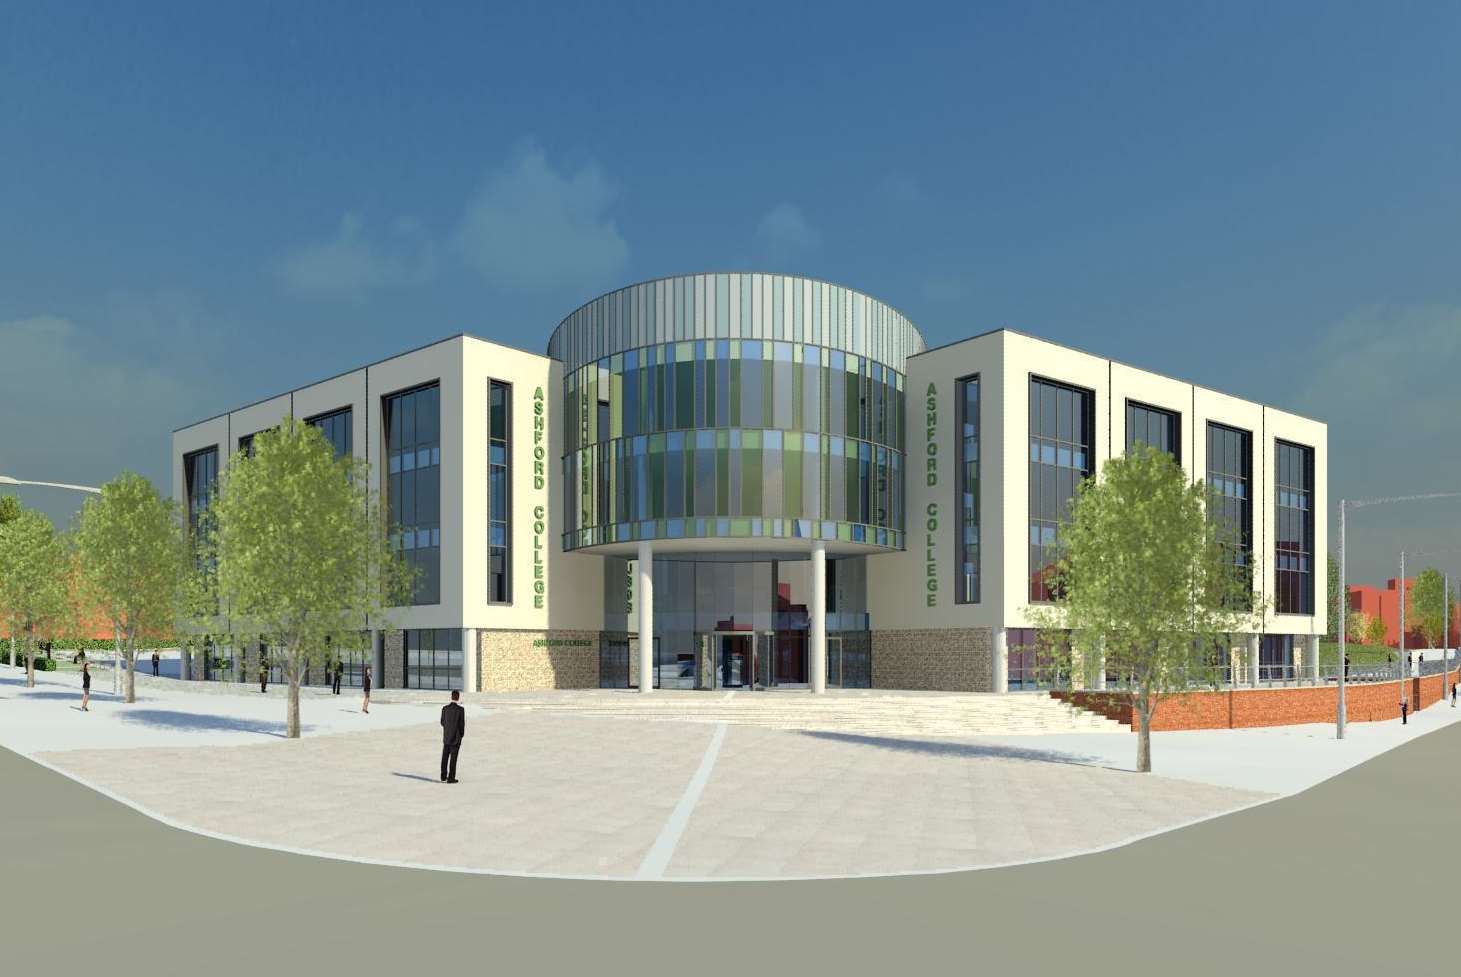 An artist's impression of the new Ashford town centre college.